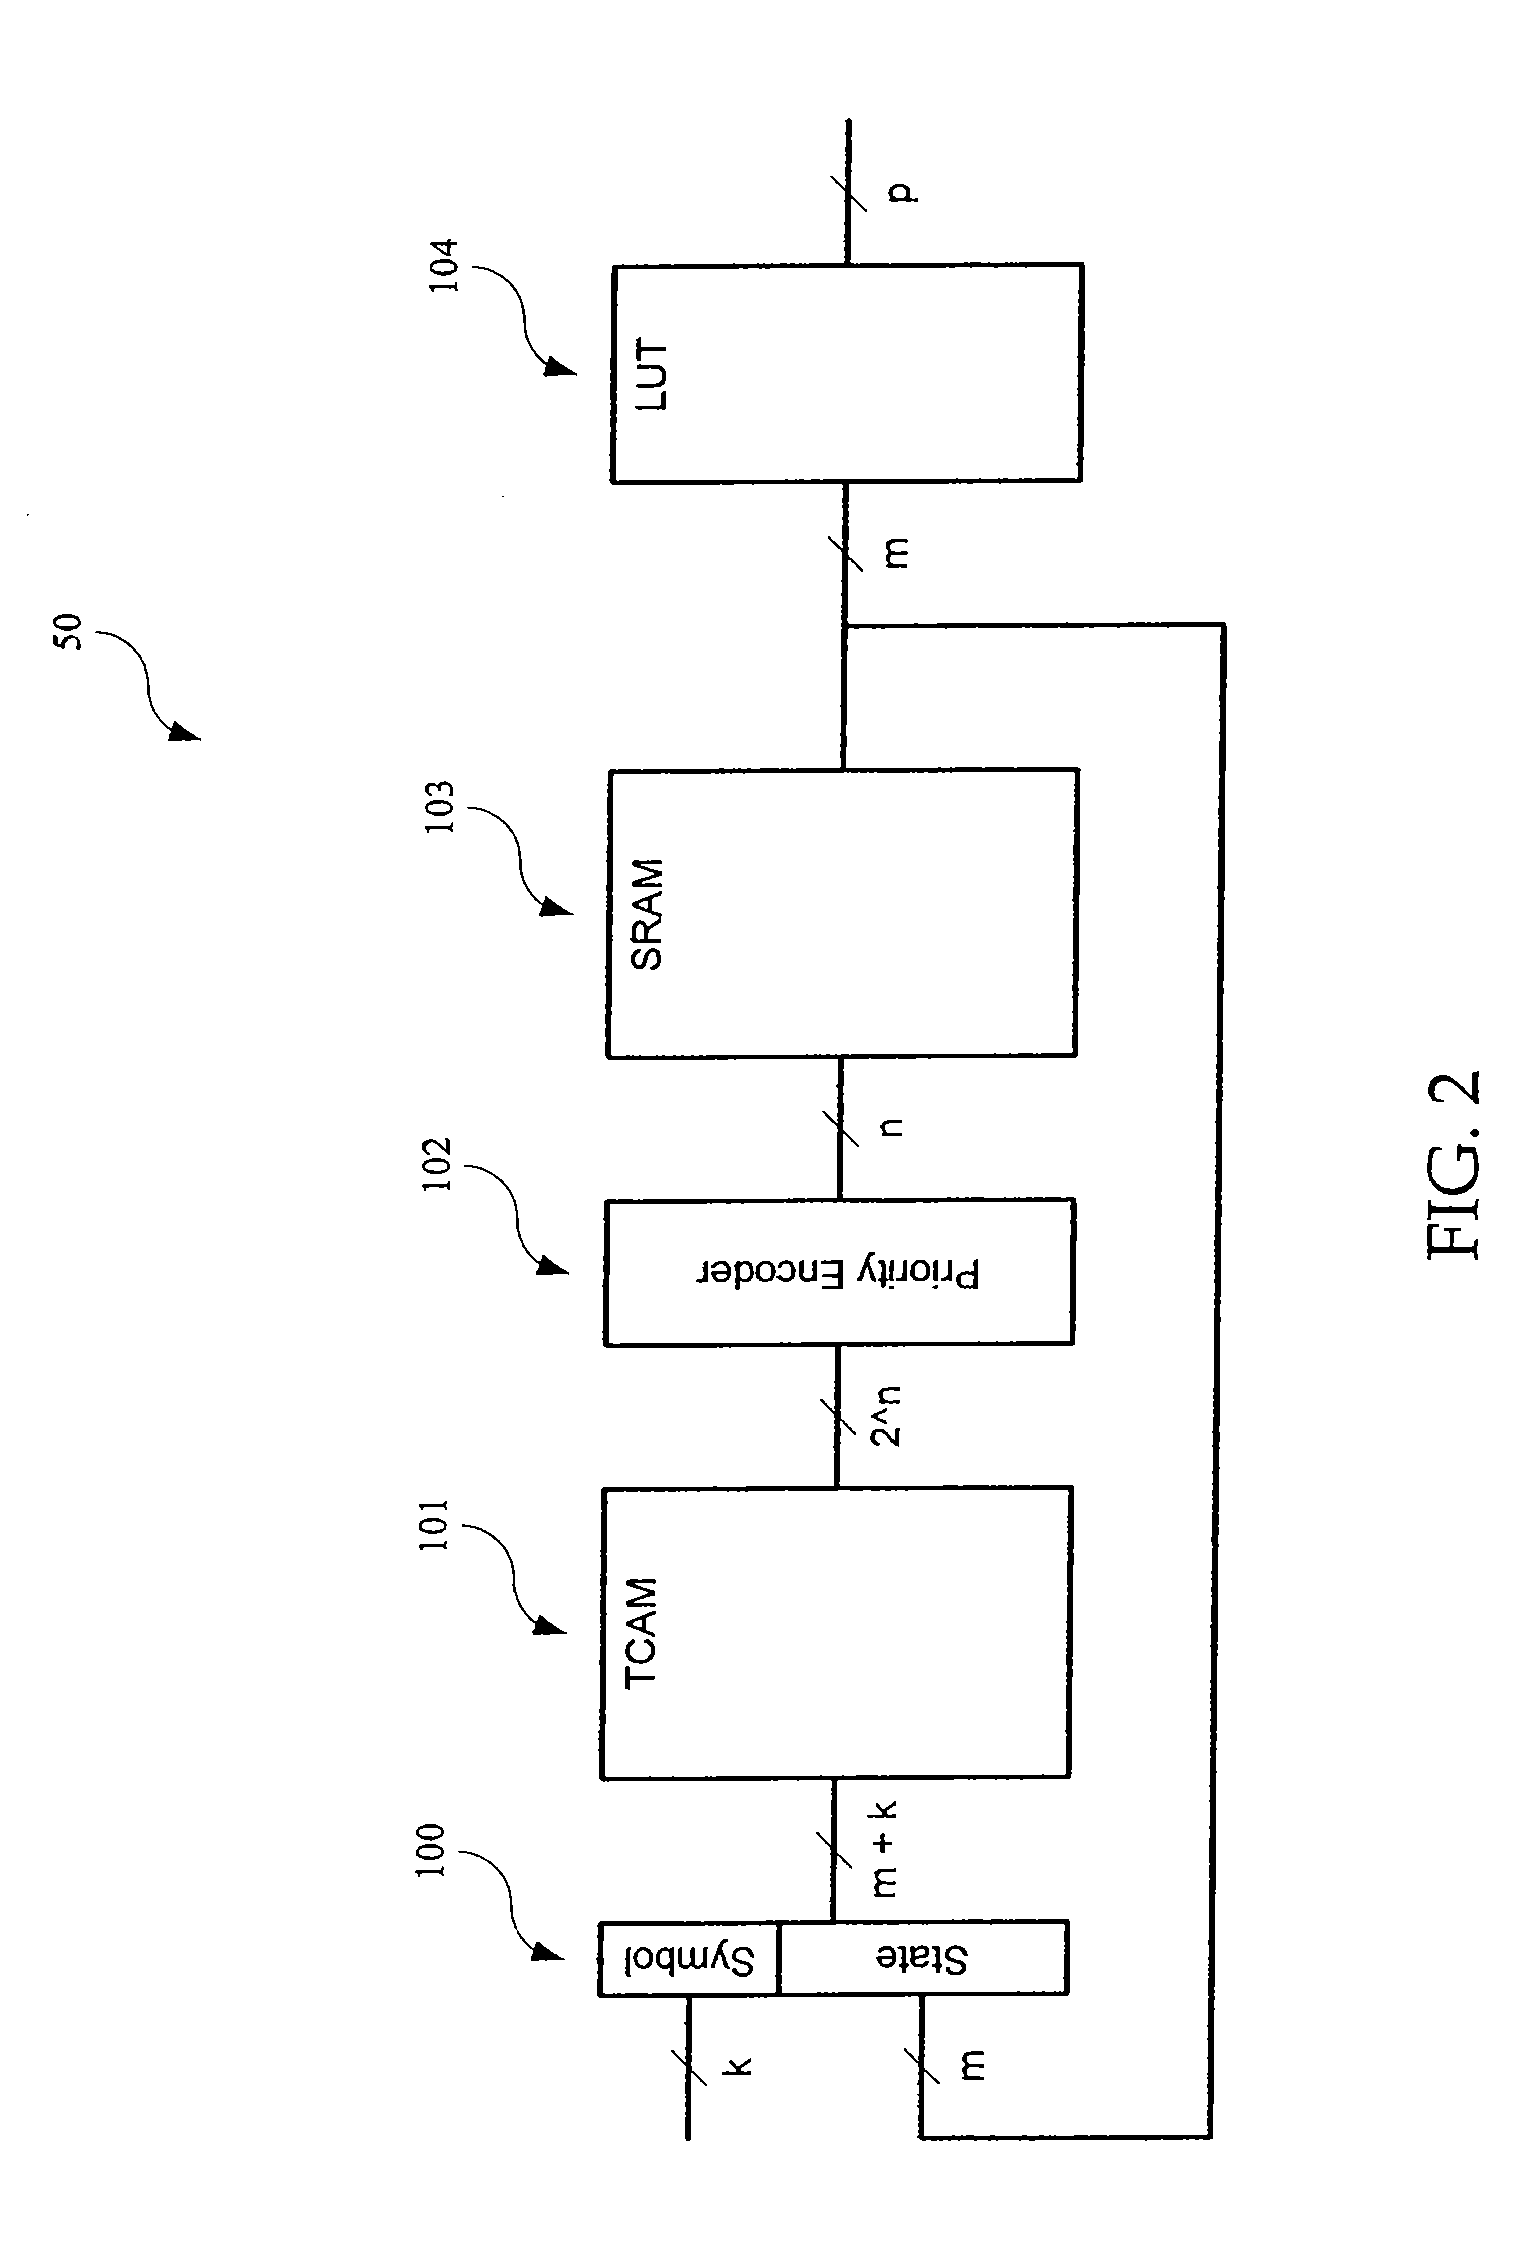 Apparatus and method for generating state transition rules for memory efficient programmable pattern matching finite state machine hardware